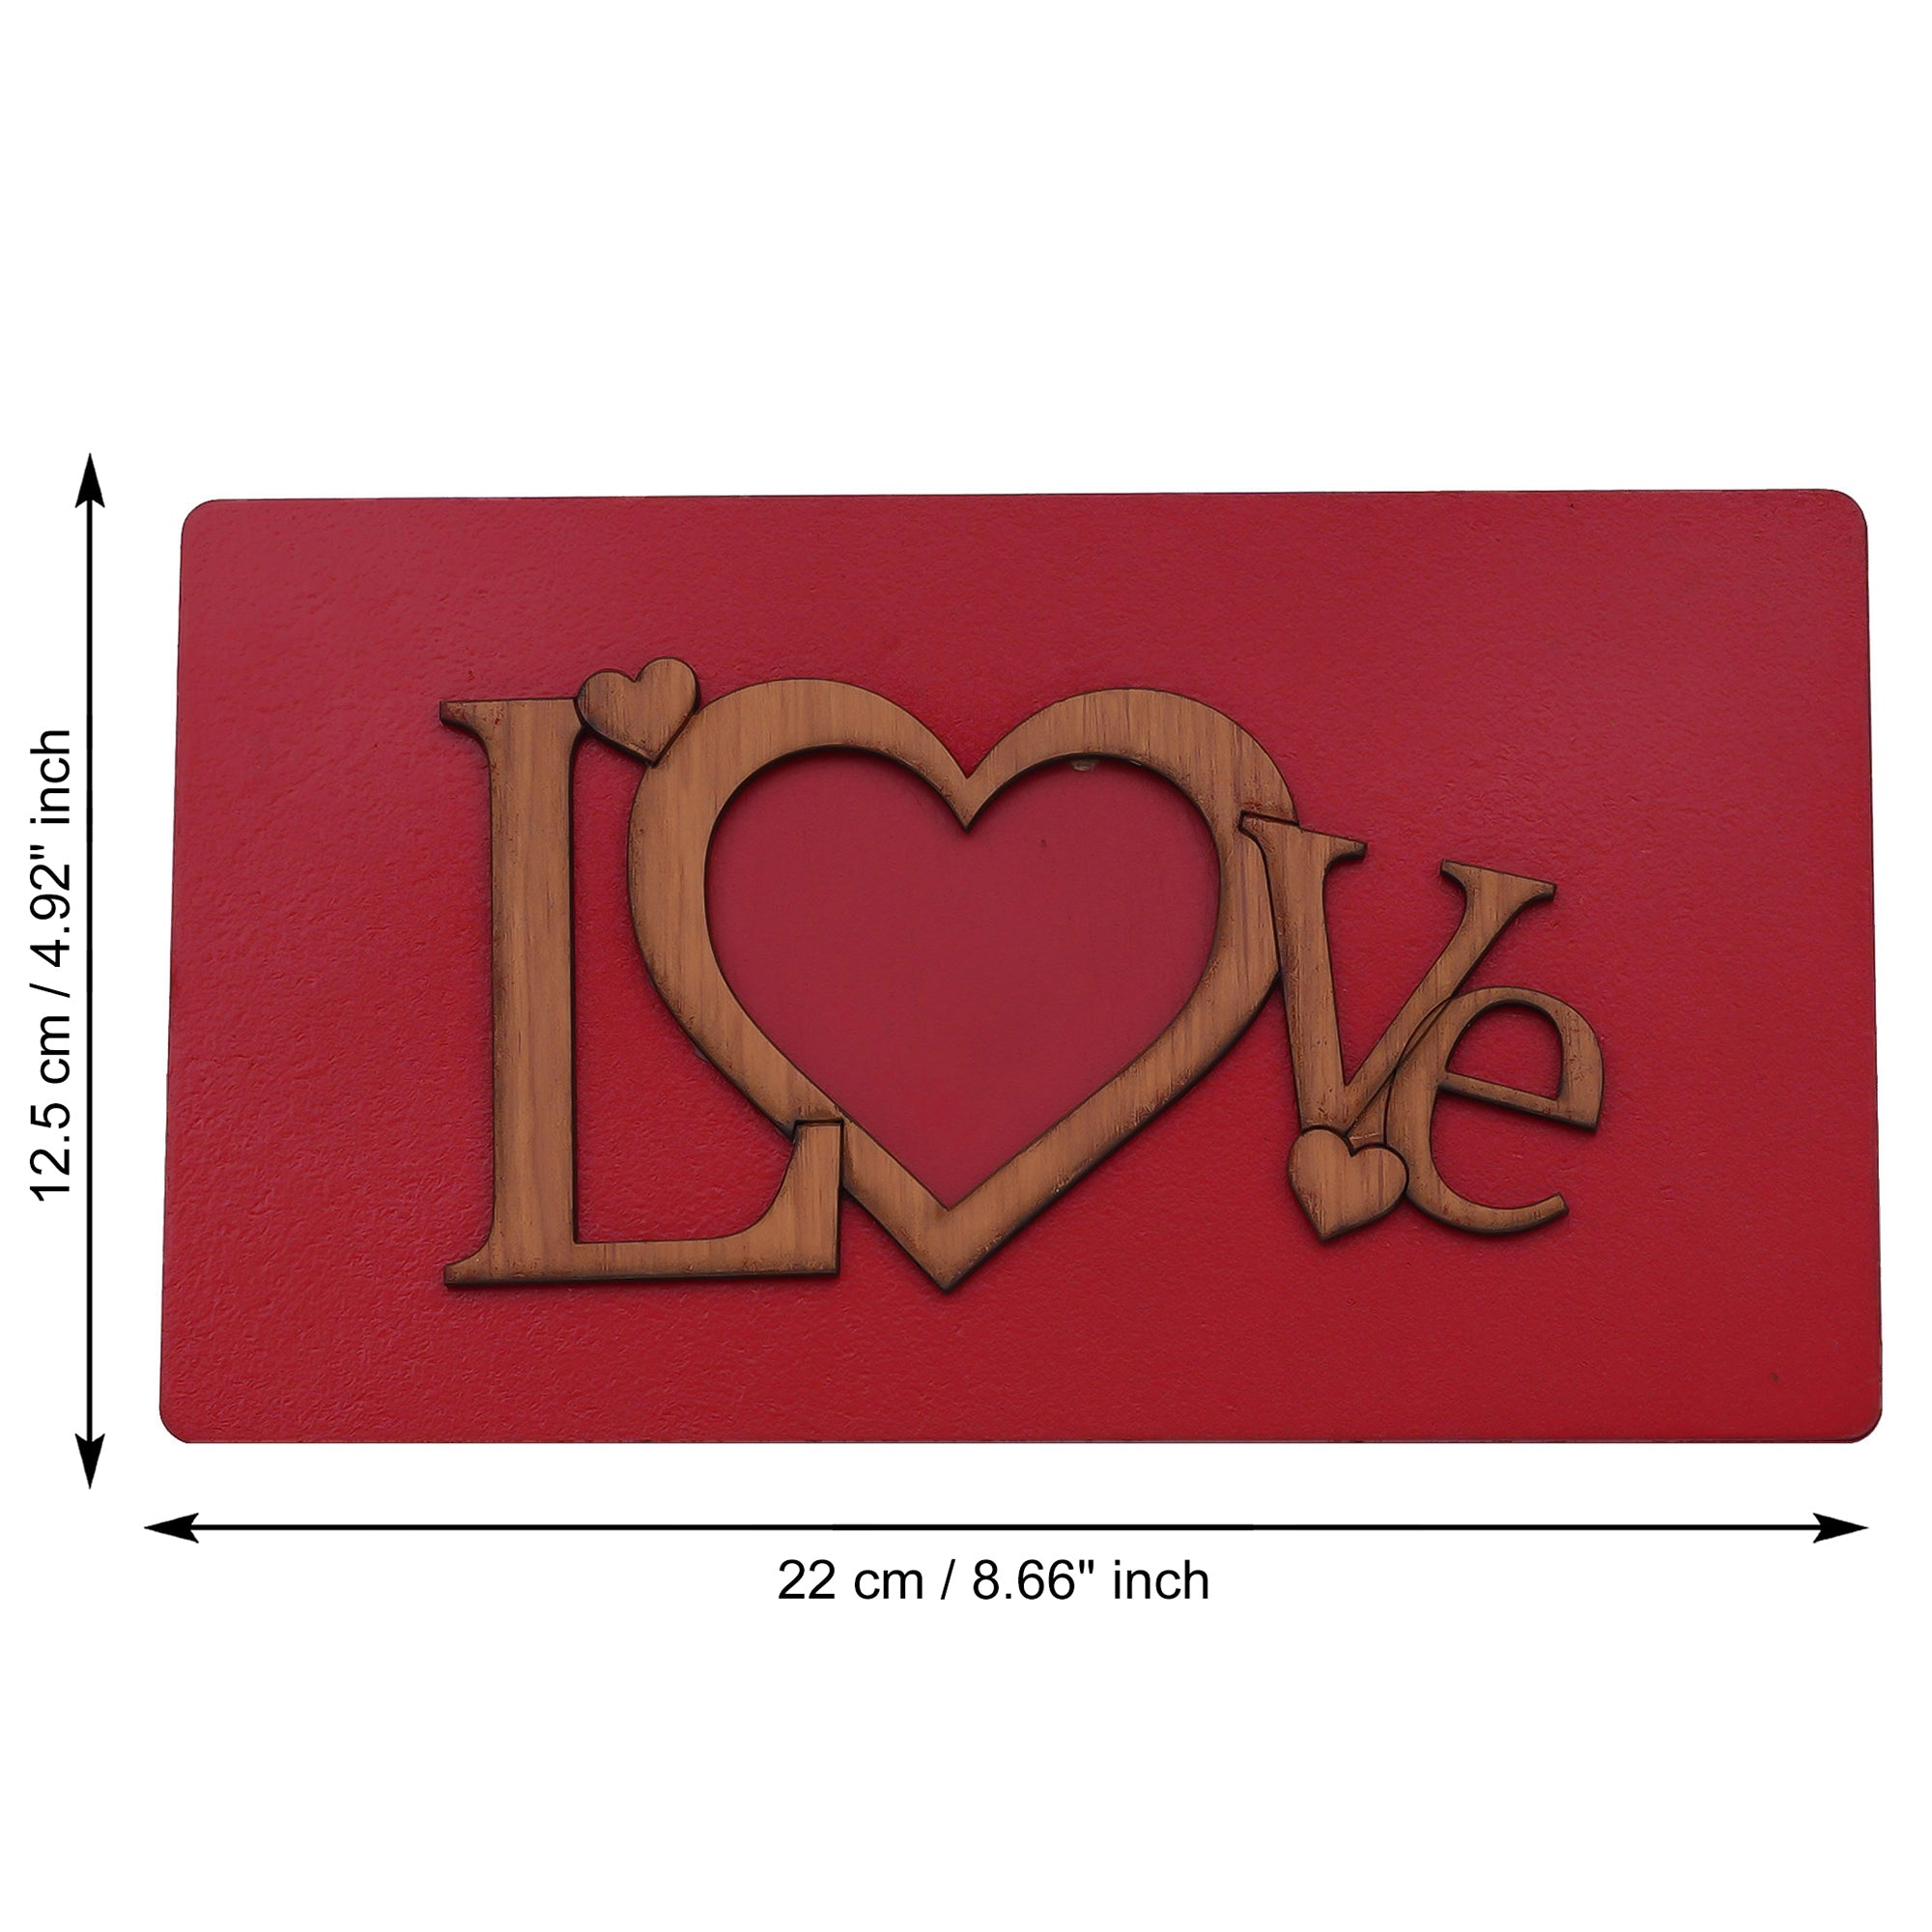 Valentine Combo of Pack of 12 Love Coupons Gift Cards Set, Golden Red Rose Gift Set, "Love" Wooden Photo Frame With Red Stand, Bride Kissing Groom Romantic Polyresin Decorative Showpiece 6